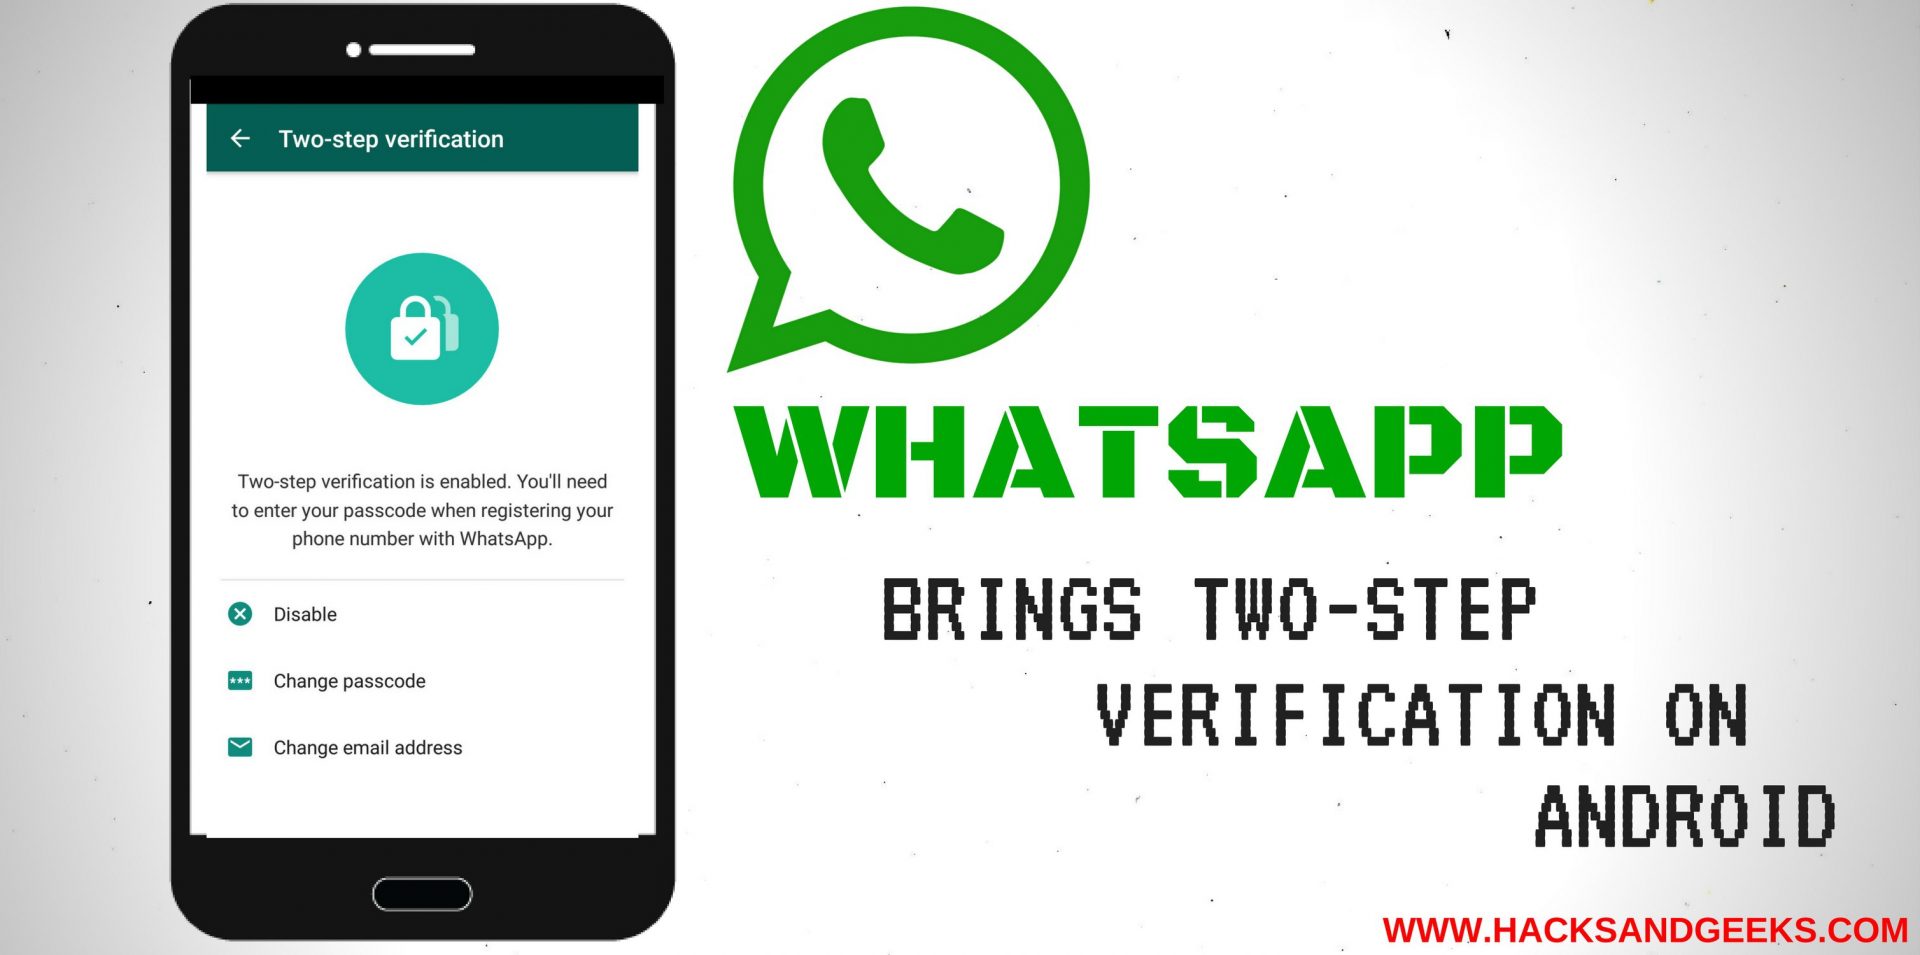 Whats app two step verification